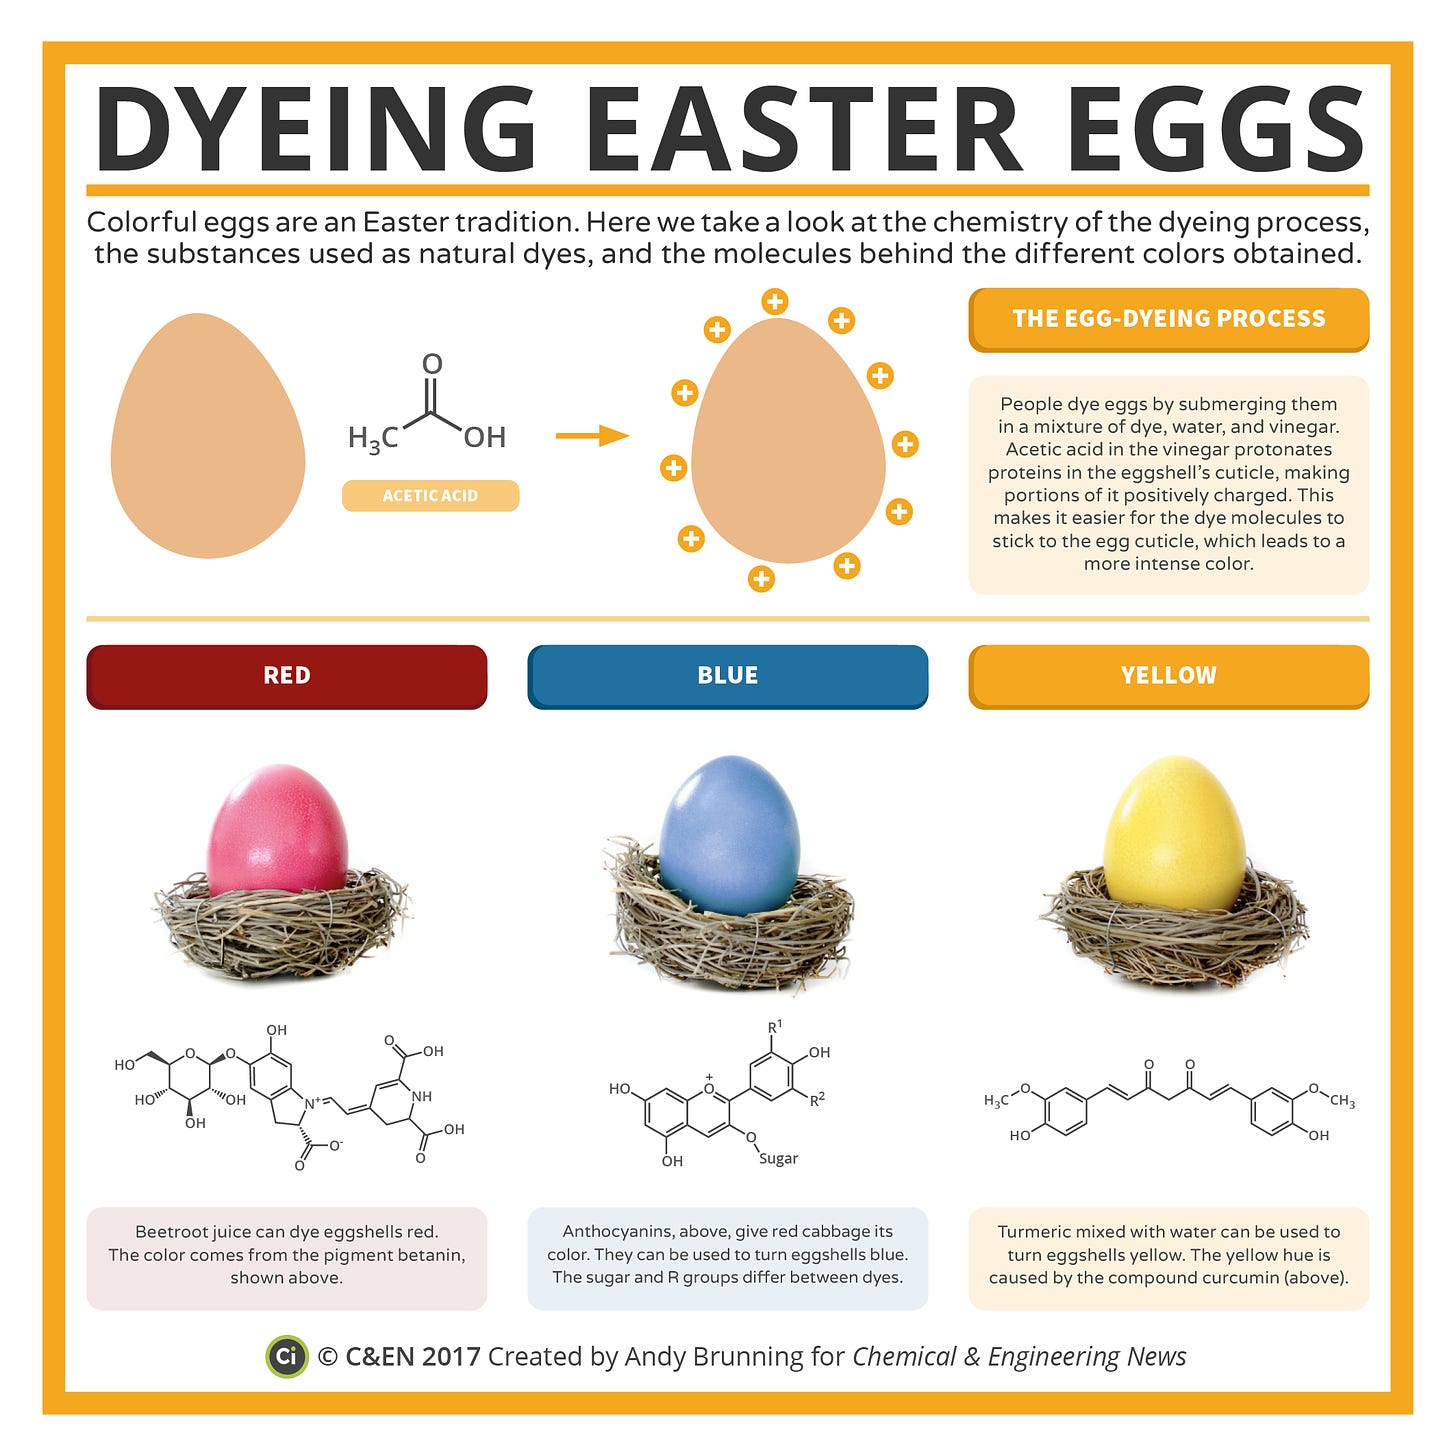 Graphic highlighting some of the different substances that can be used to dye egg shells various colours and the chemical structures of their dyes. Beetroot (red from betanin), red cabbage (blue from anthocyanins) and turmeric (yellow from curcumin) are highlighted.